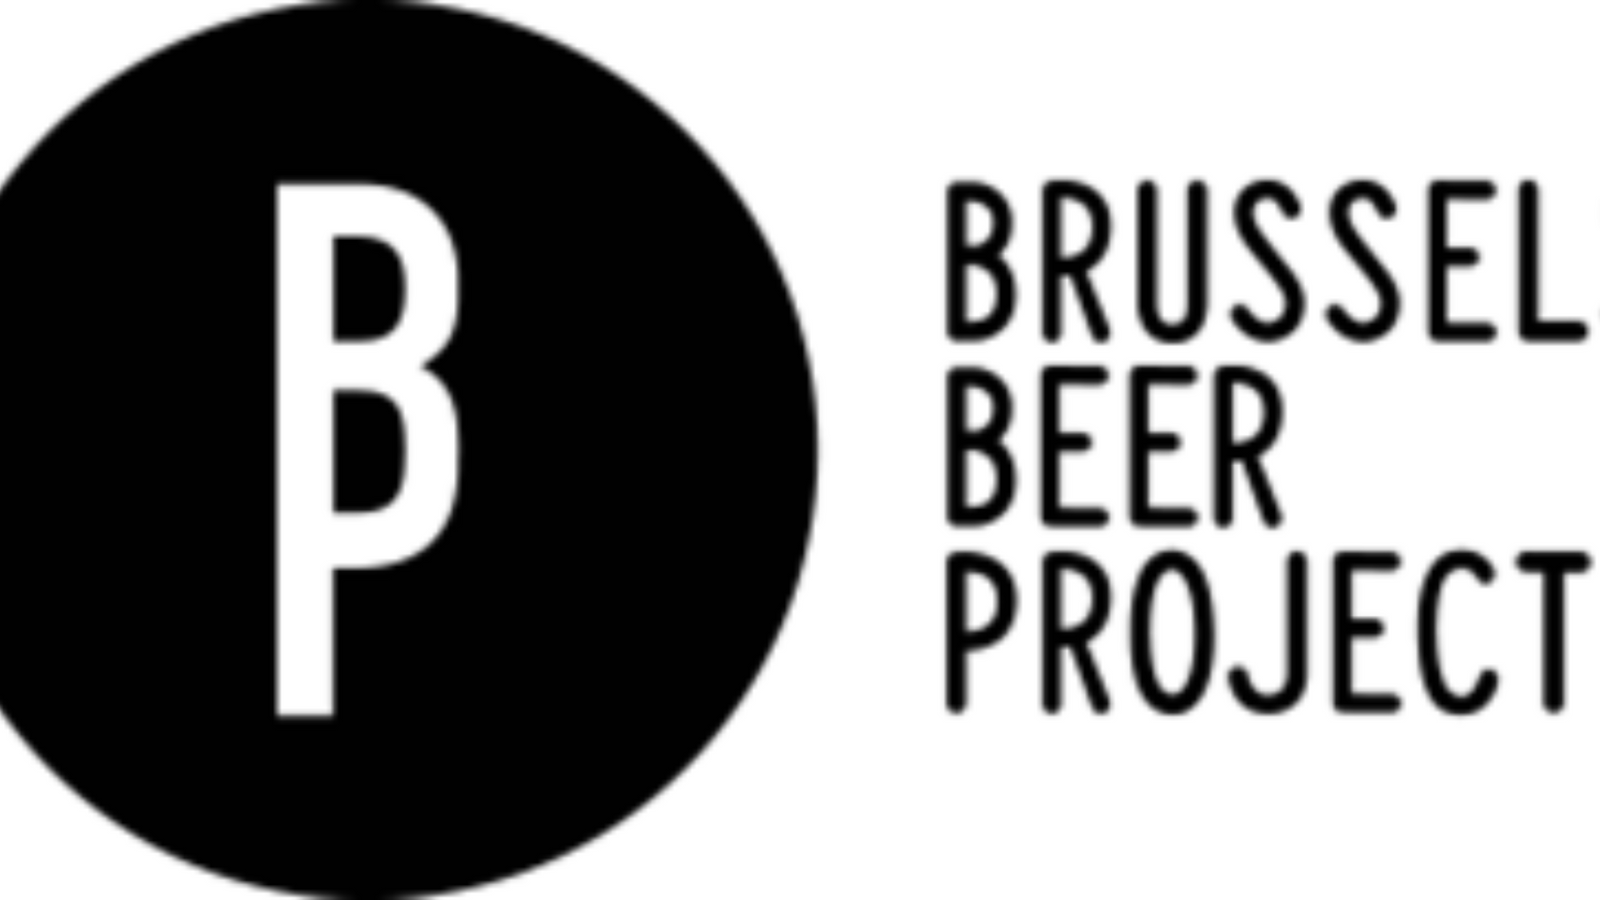 Brussels Beer Project logo